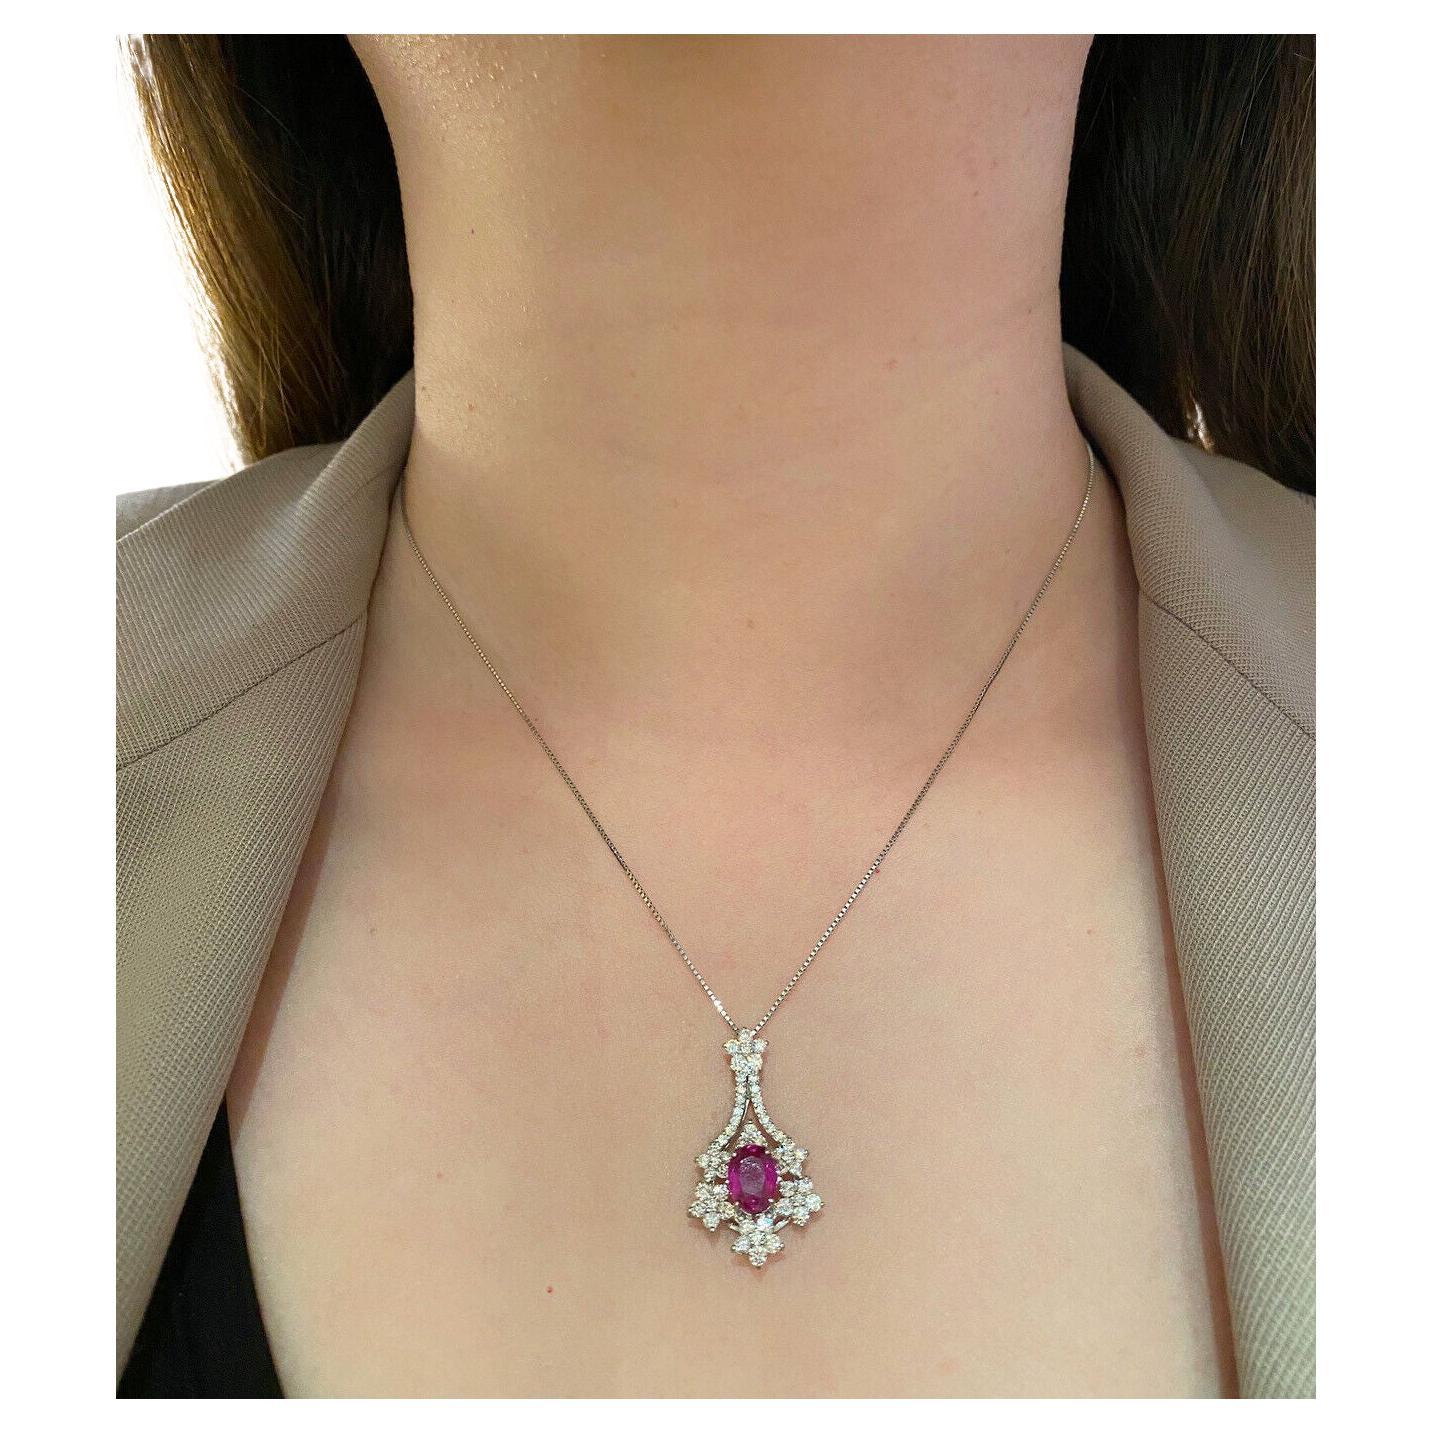 GIA Unheated Oval Ruby Pendant with Diamonds in Platinum

Ruby and Diamond Pendant Necklace features a large Oval shaped Red Ruby surrounded by Natural Round Brilliant Diamonds in fancy floral motif set in Platinum.

The Ruby originates from